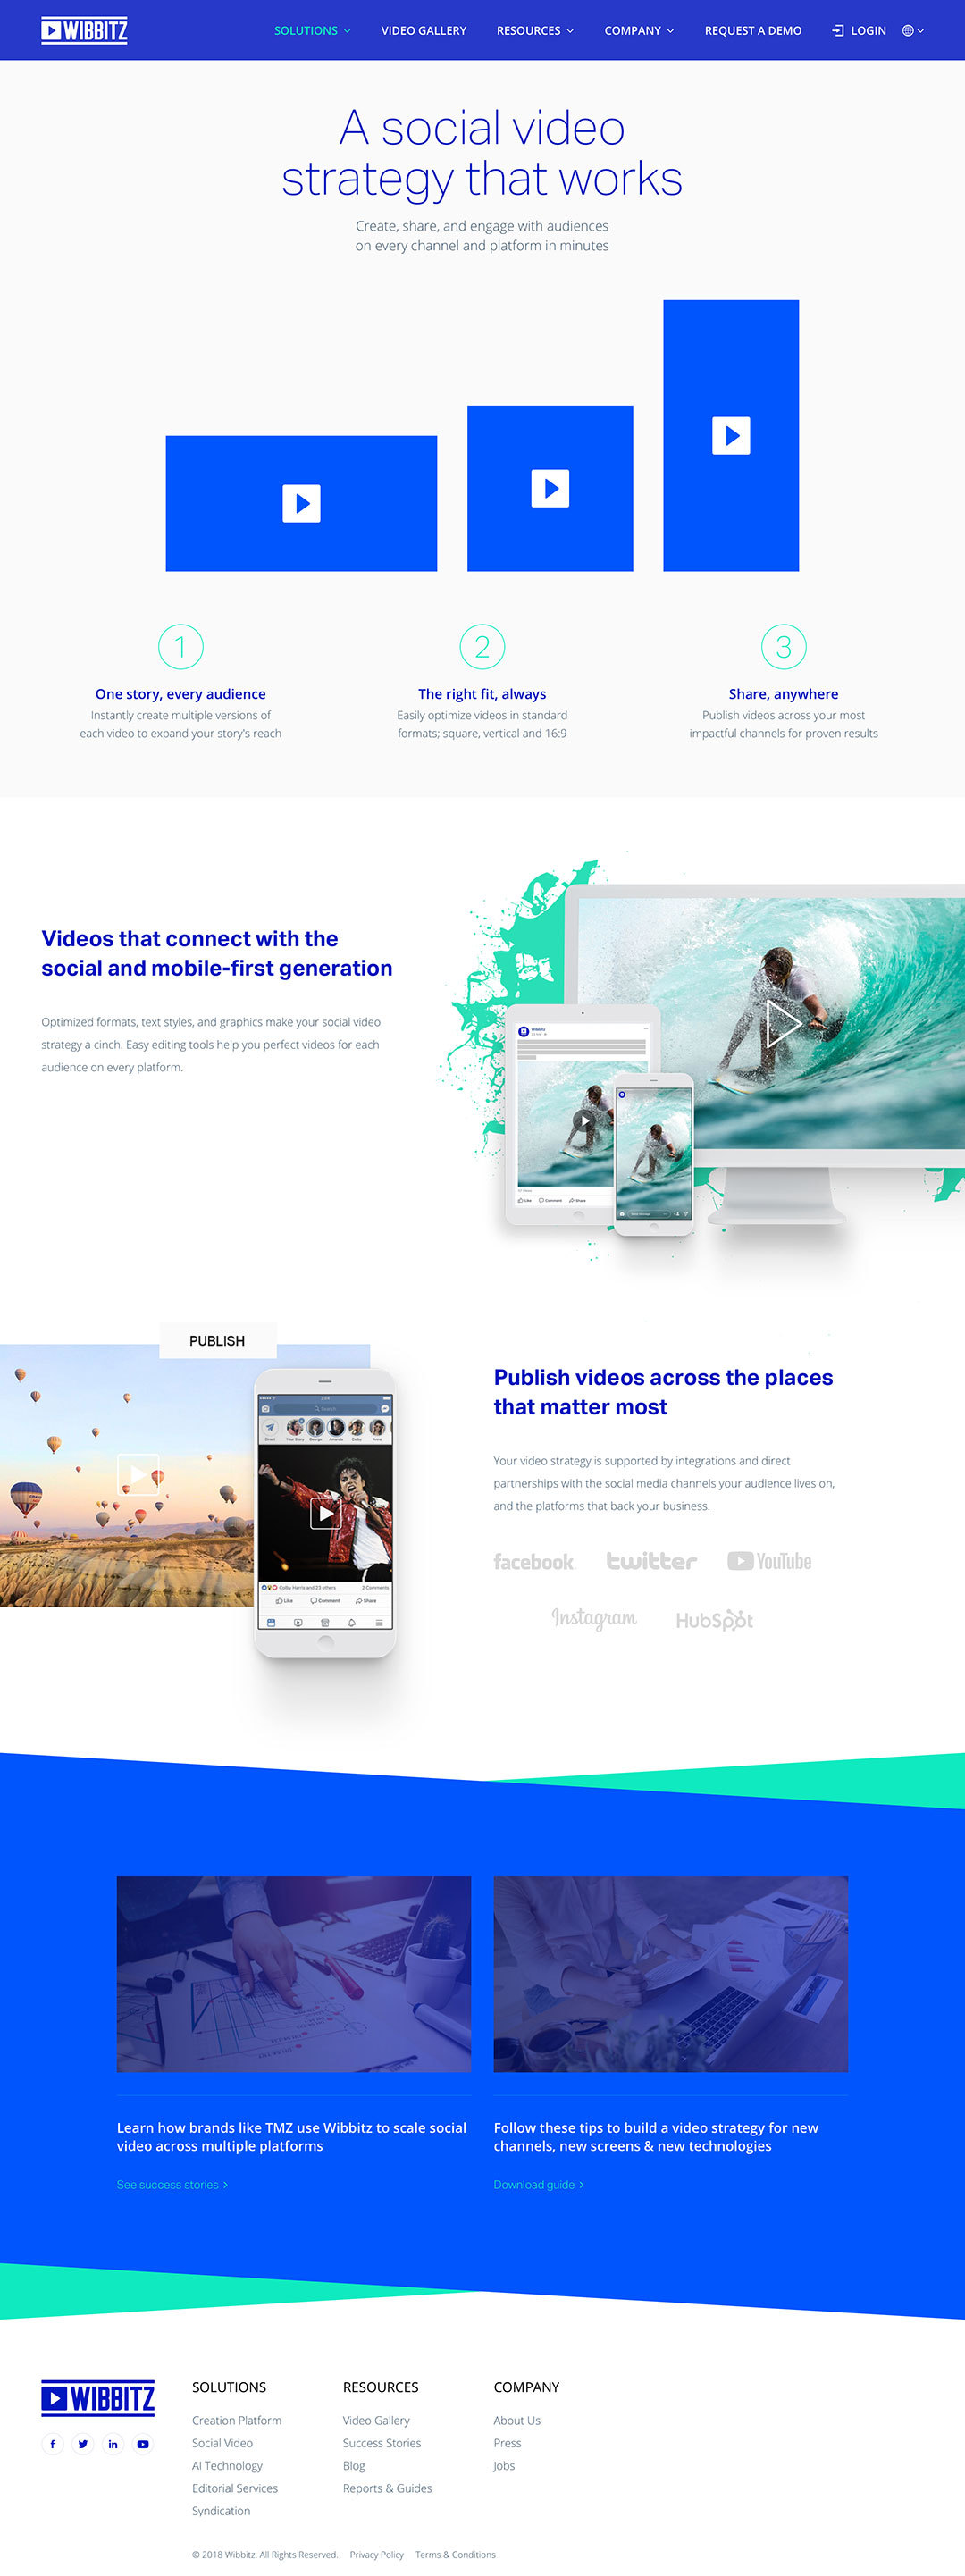 Wibbitz: Easy Online Video Creation & Editing on Land-book - get inspired  by landing design and more